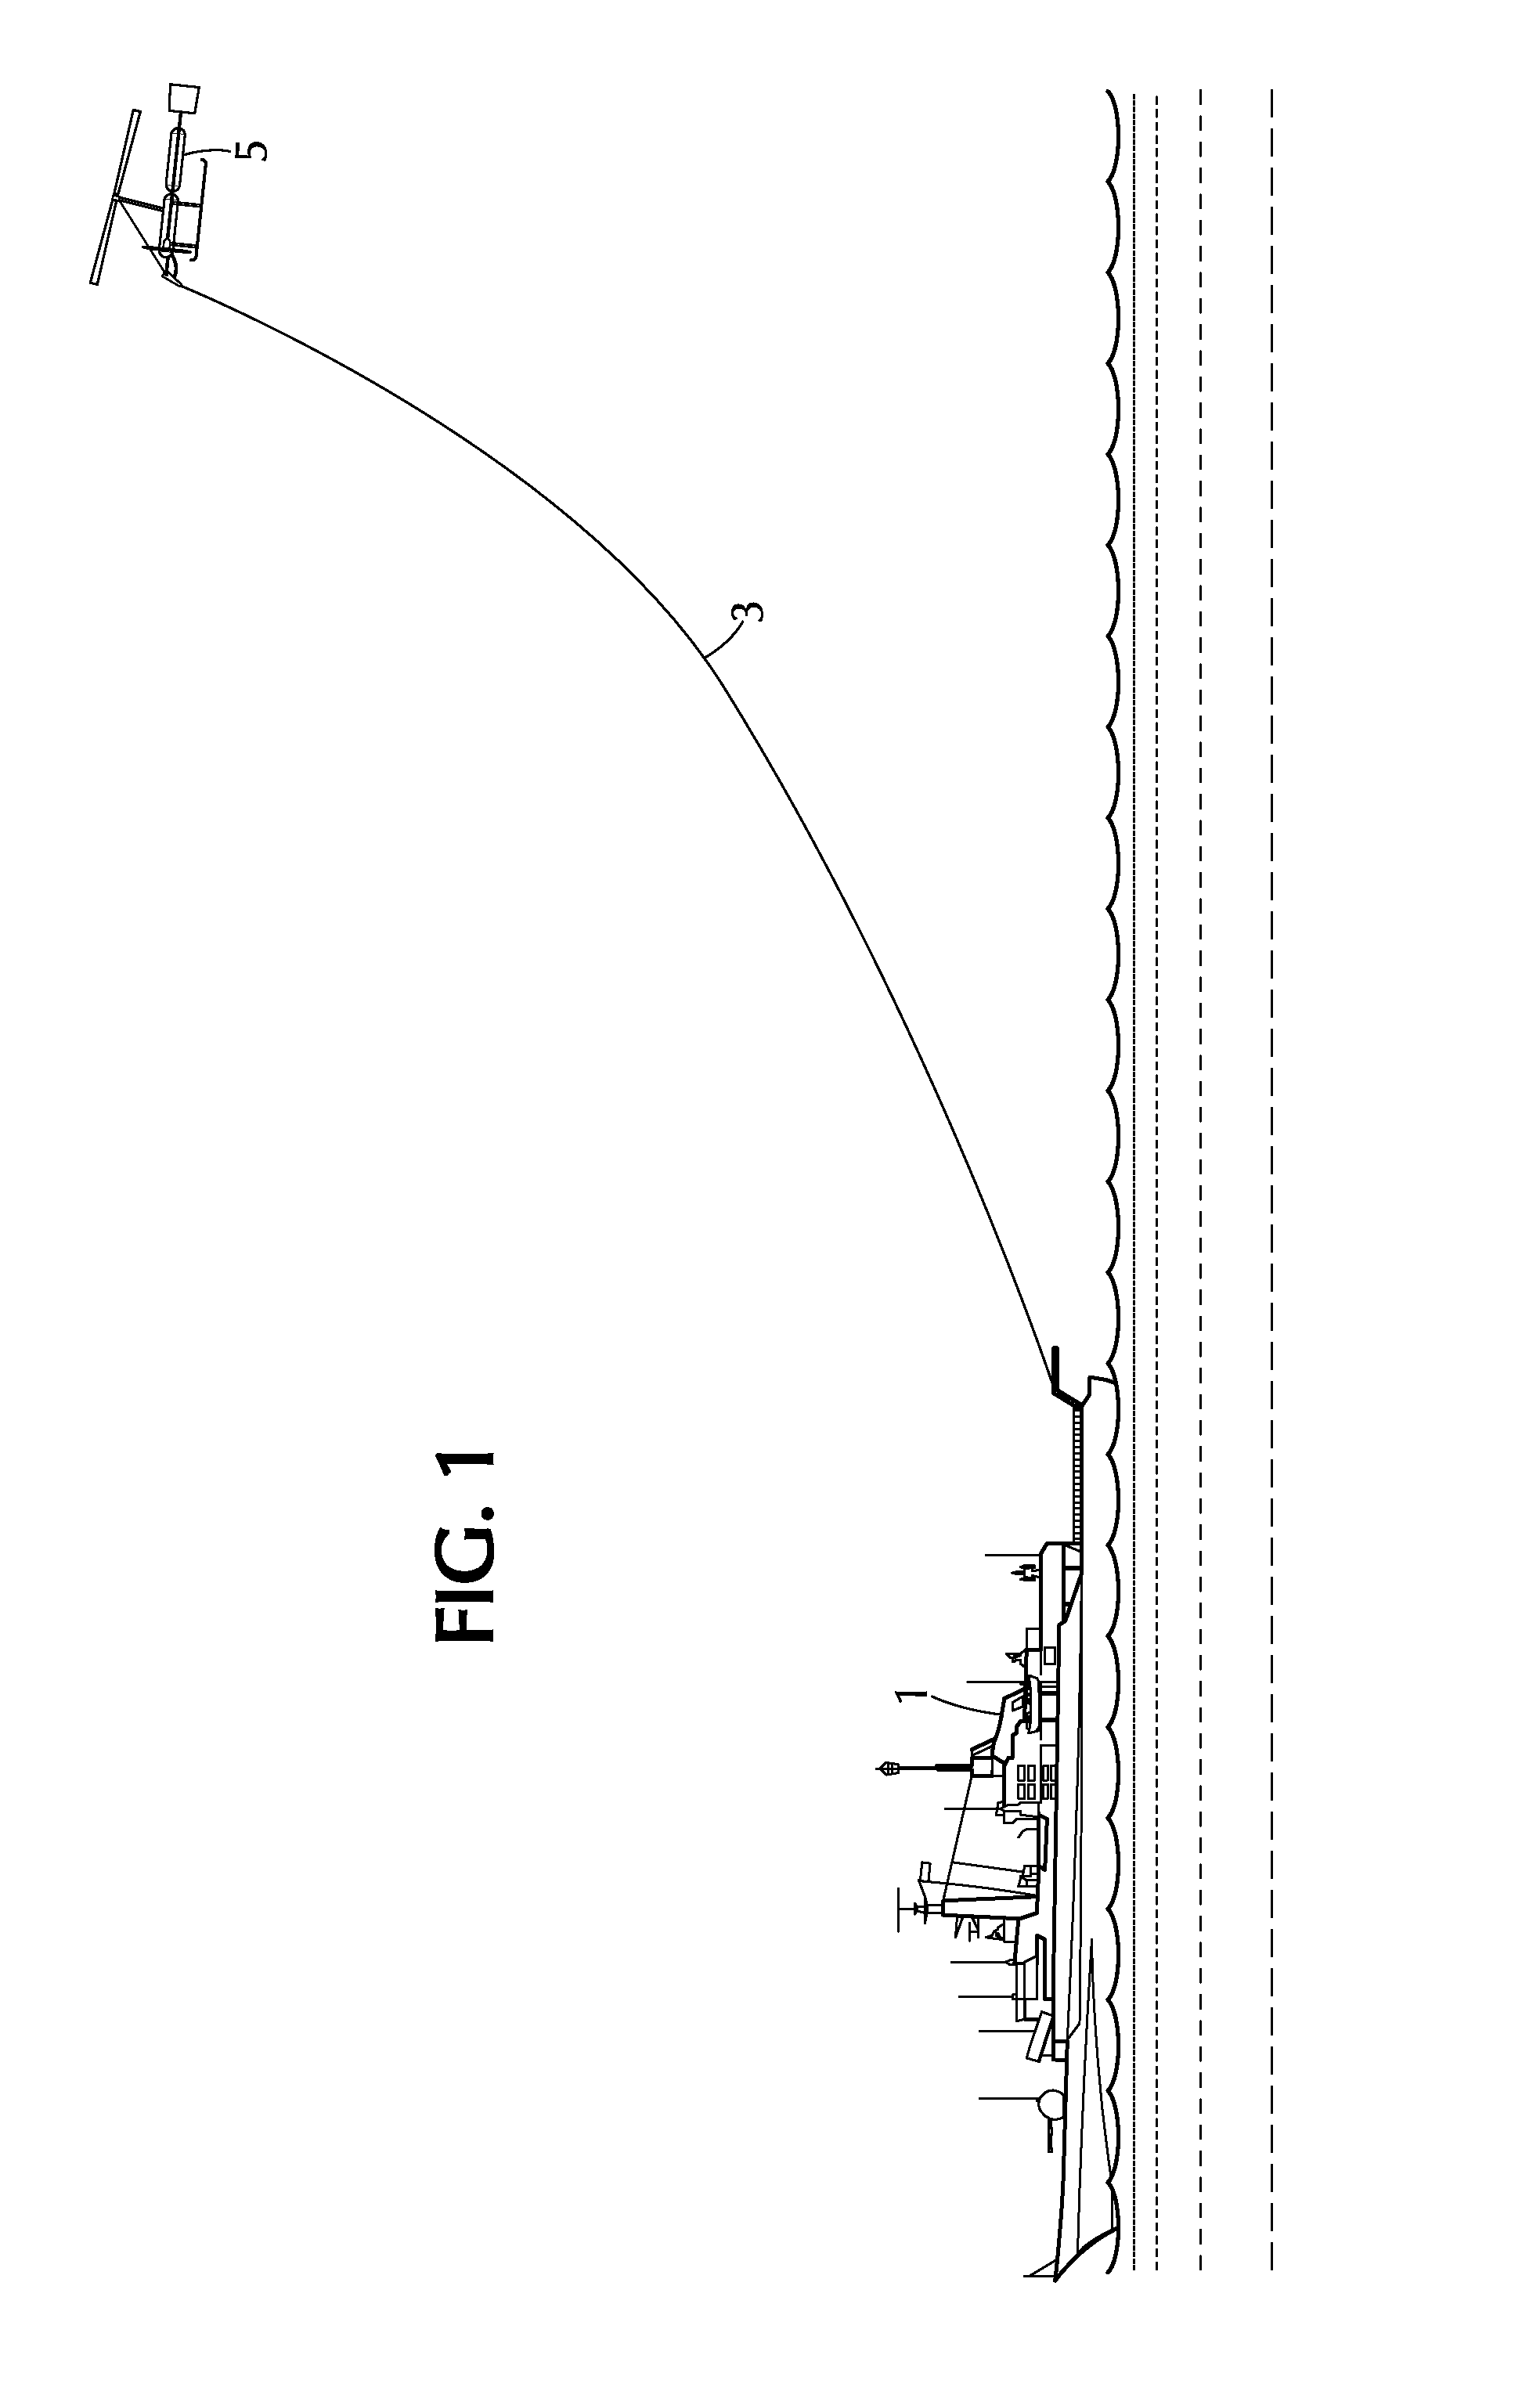 Tethered payload system and method